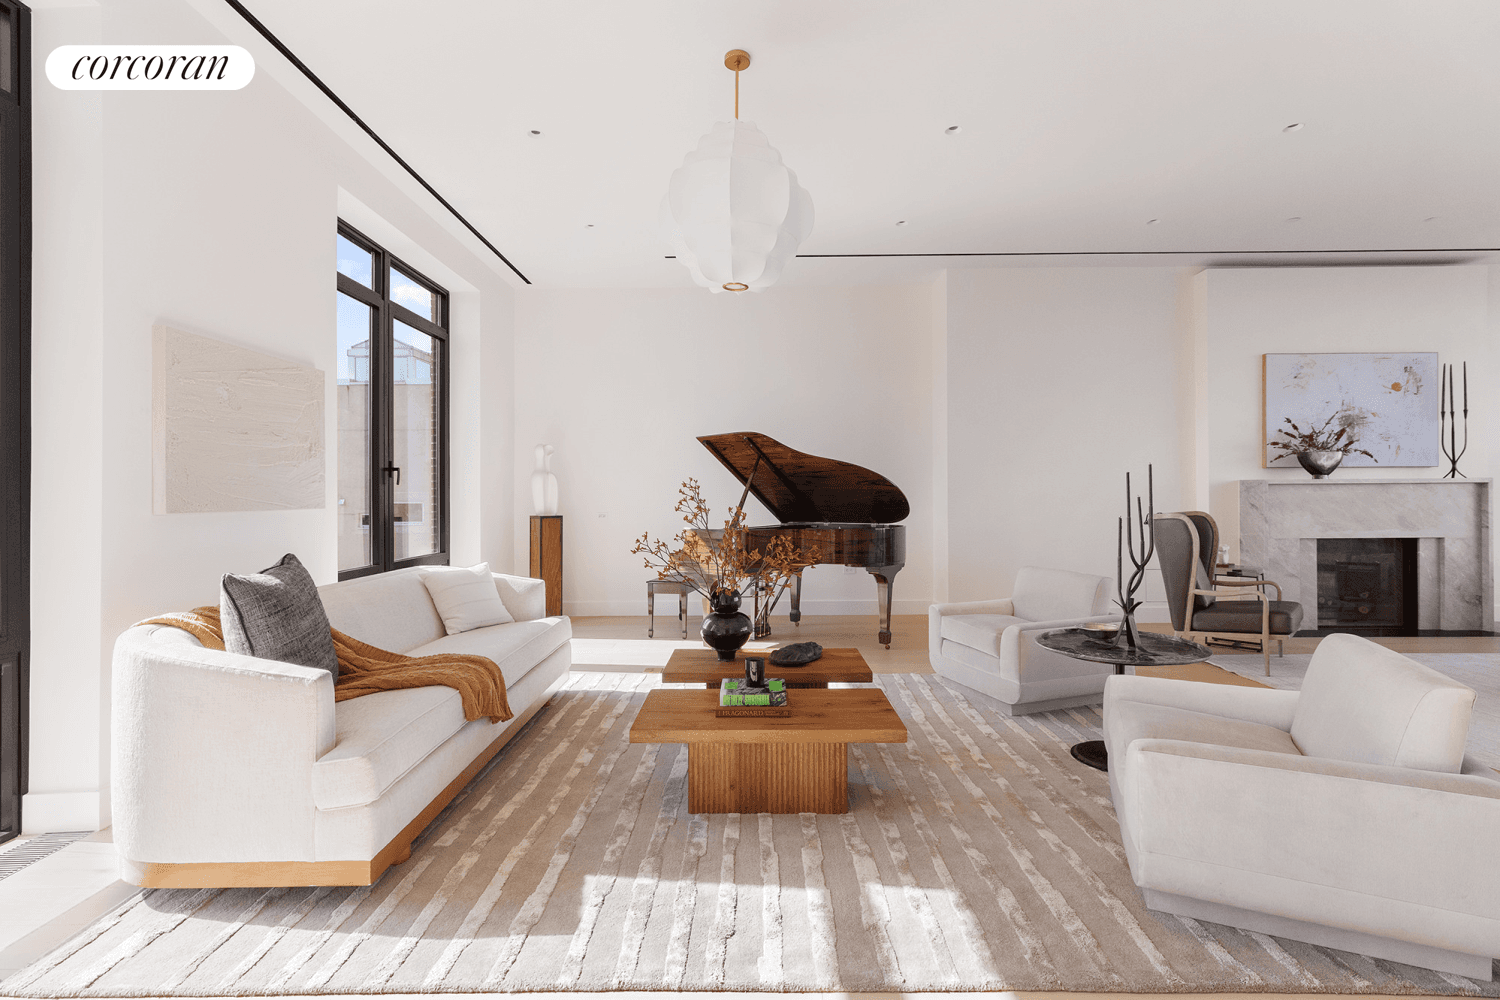 Introducing Penthouse A at 67 Vestry Street, a rare gem nestled in the heart of Downtown Manhattan.